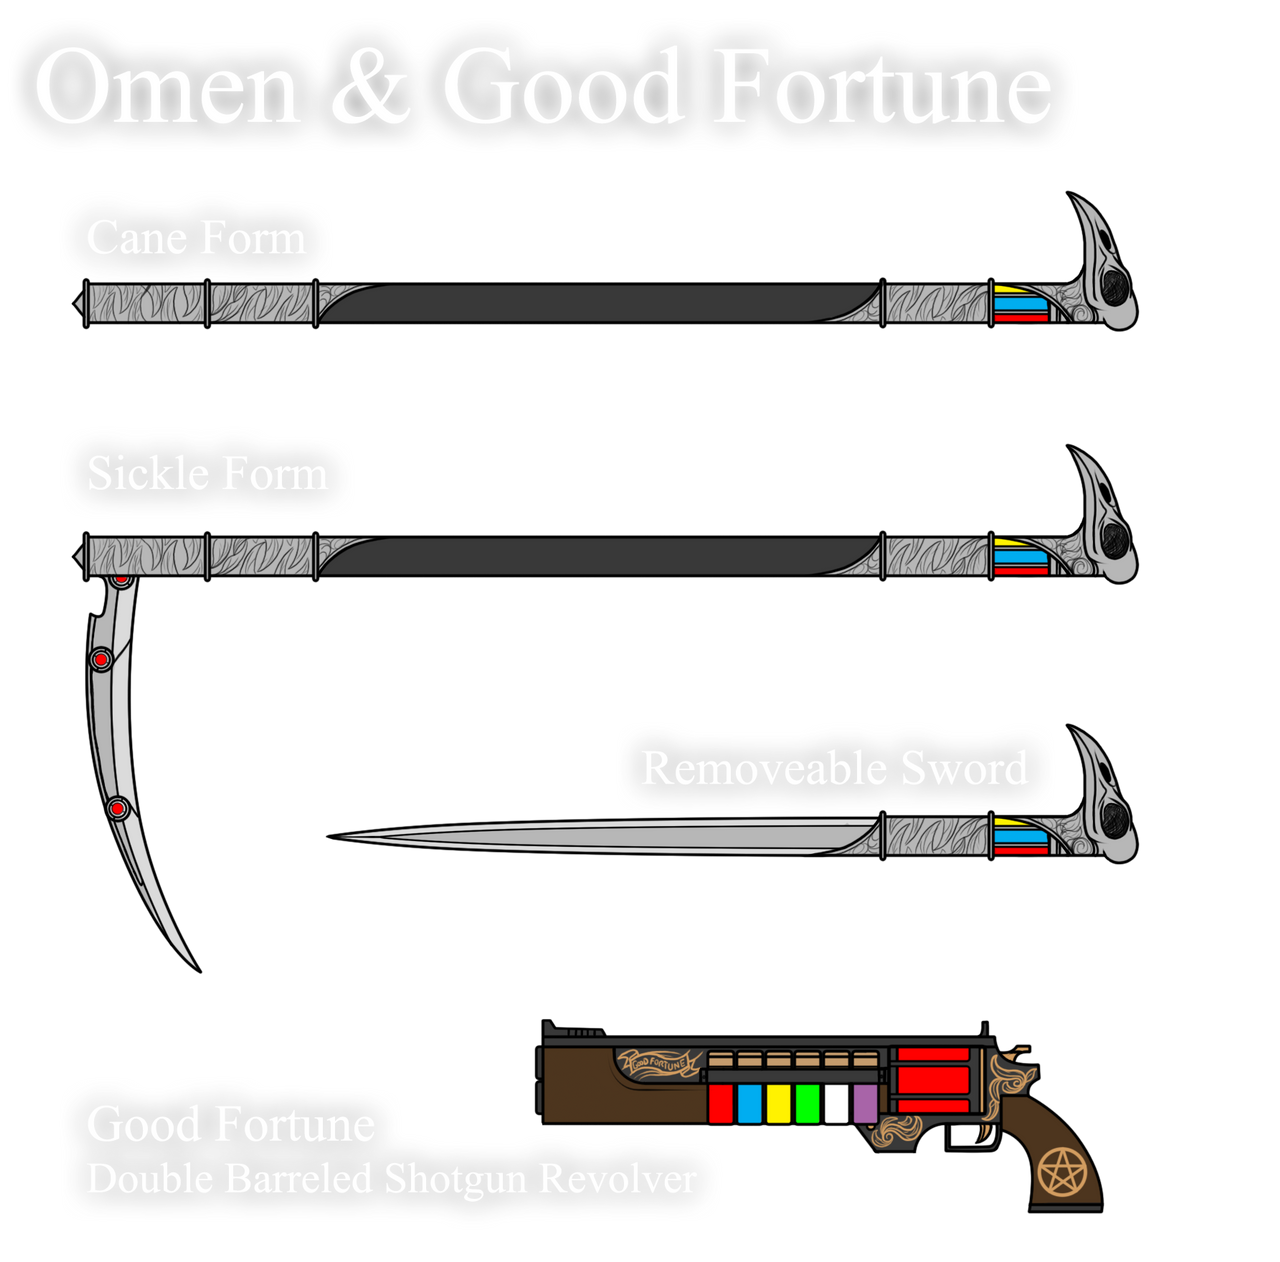 rwby_weapon___omen_and_good_fortune_by_diyaru4500_ded1tbj-fullview.png